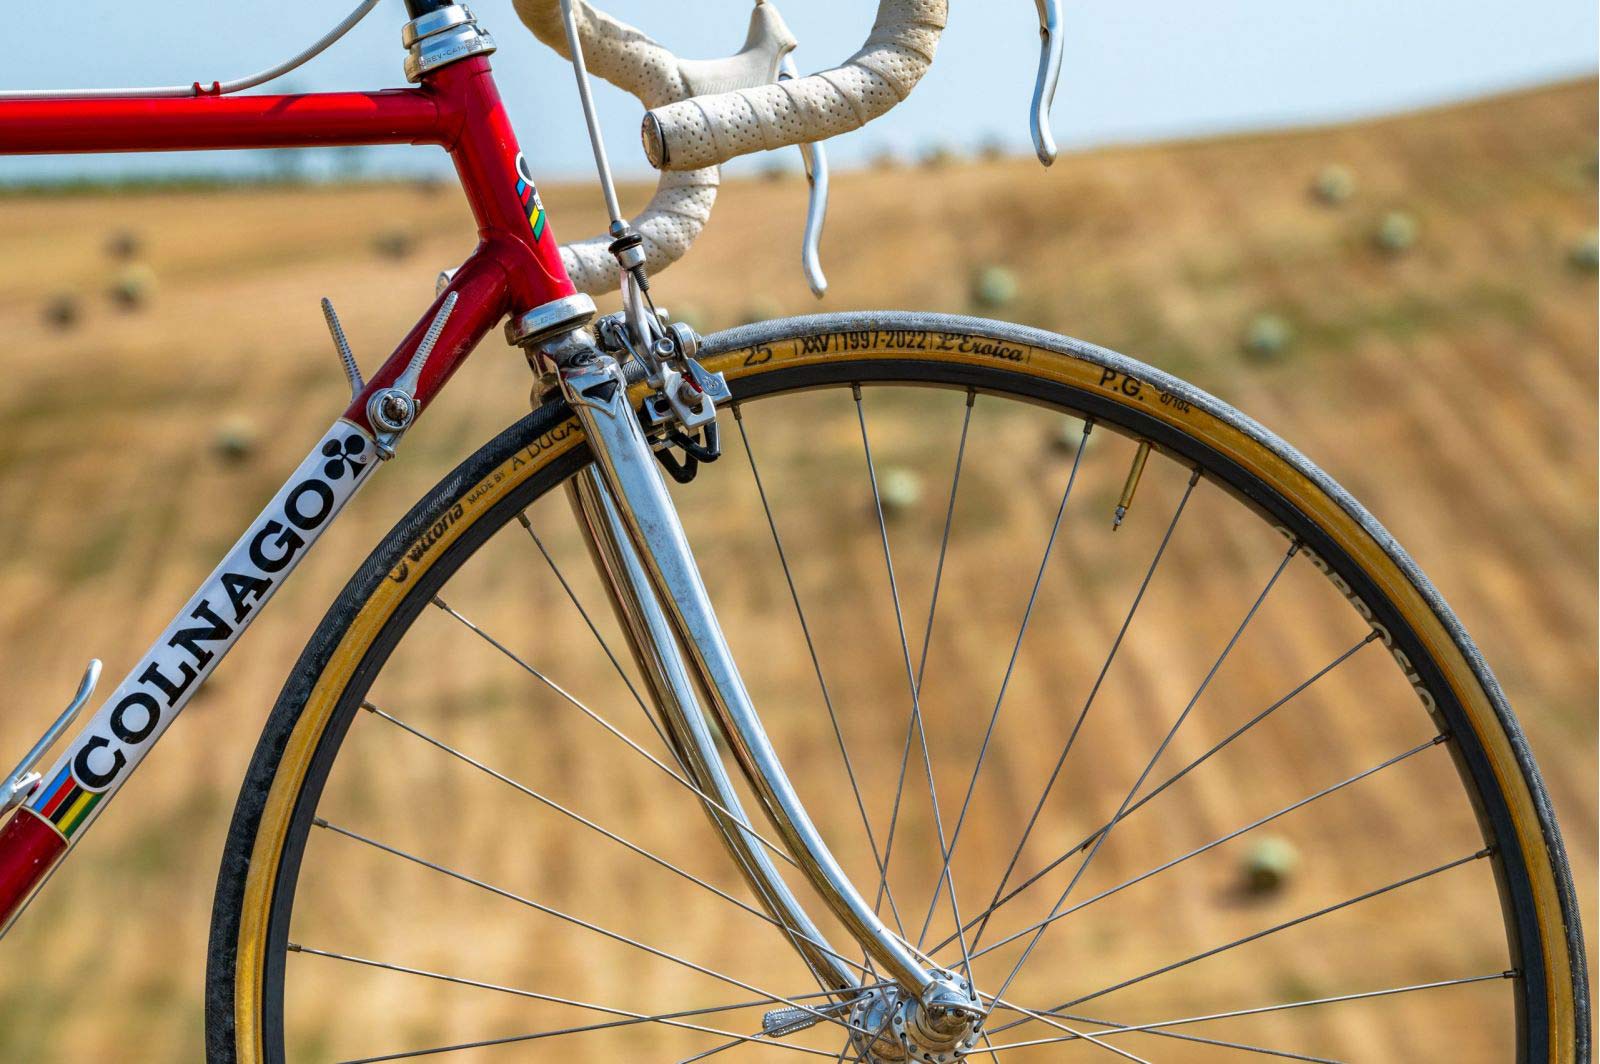 limited edition l'eroica vittoria tubular tires made by a dugast